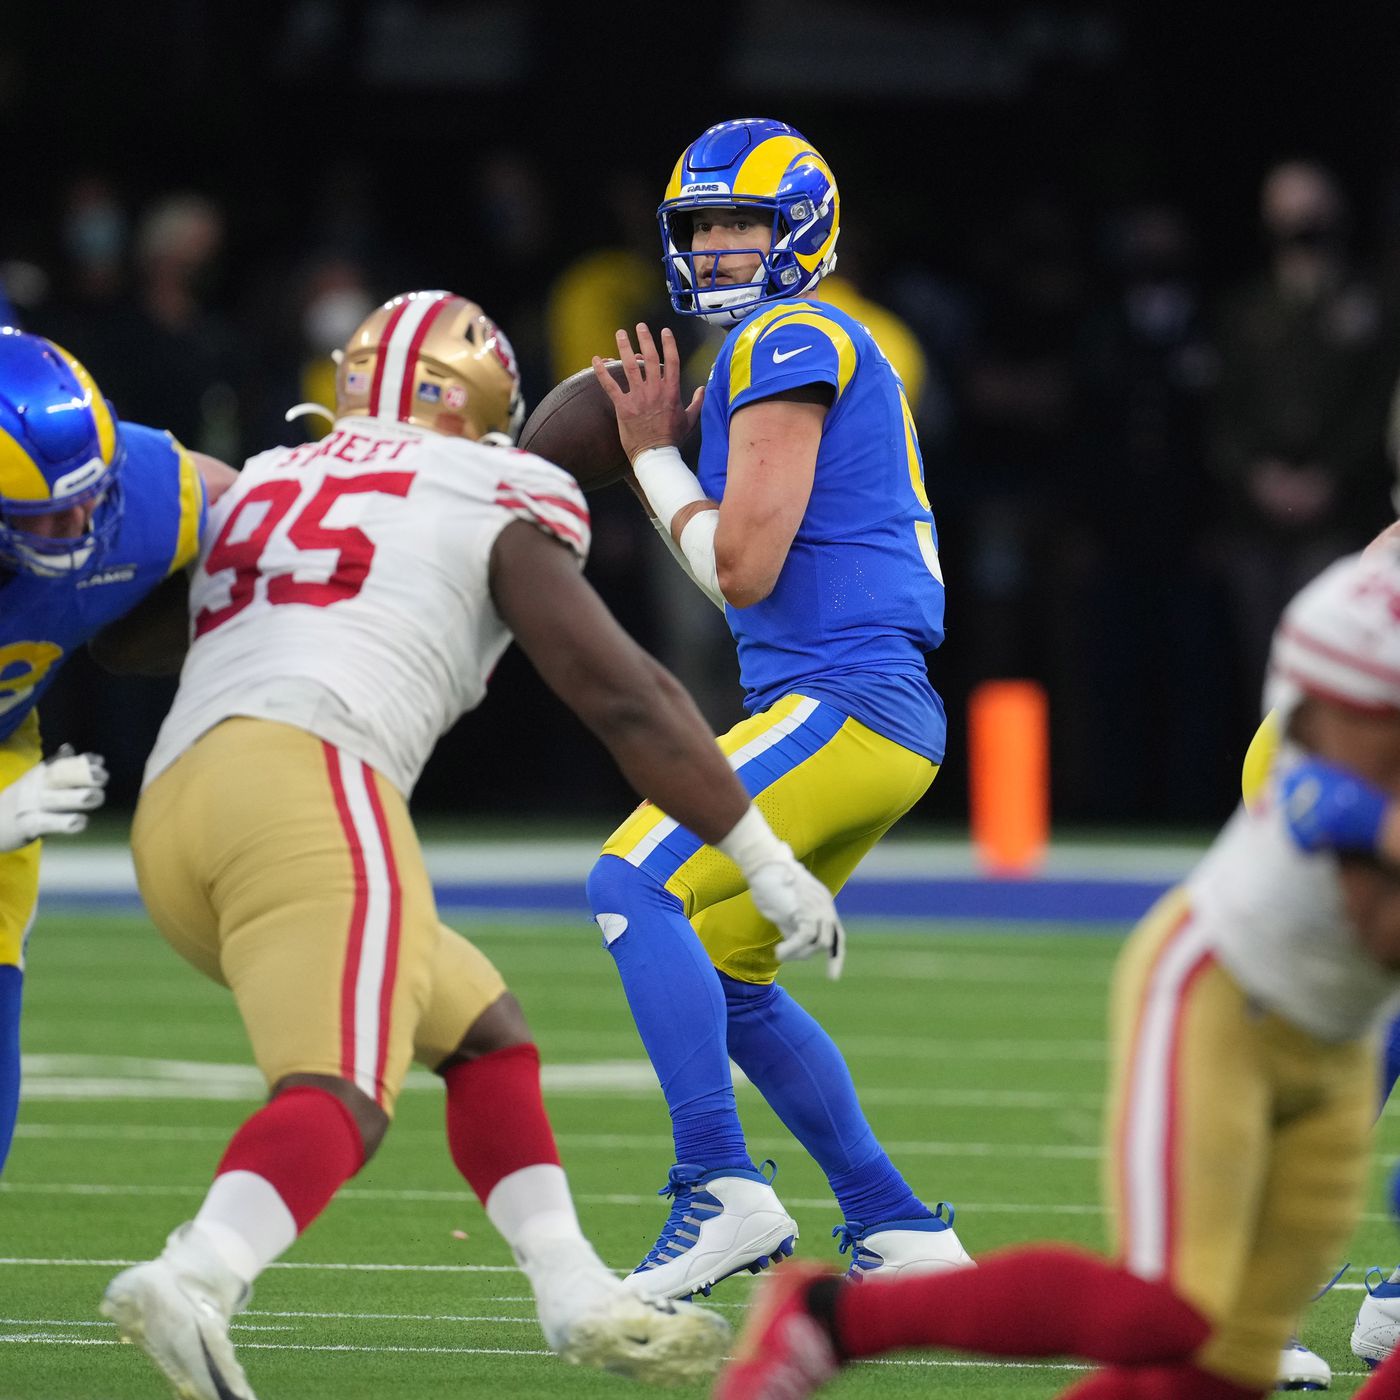 Rams vs. 49ers live streams: How to watch NFL 'Monday Night Football' game  online without cable